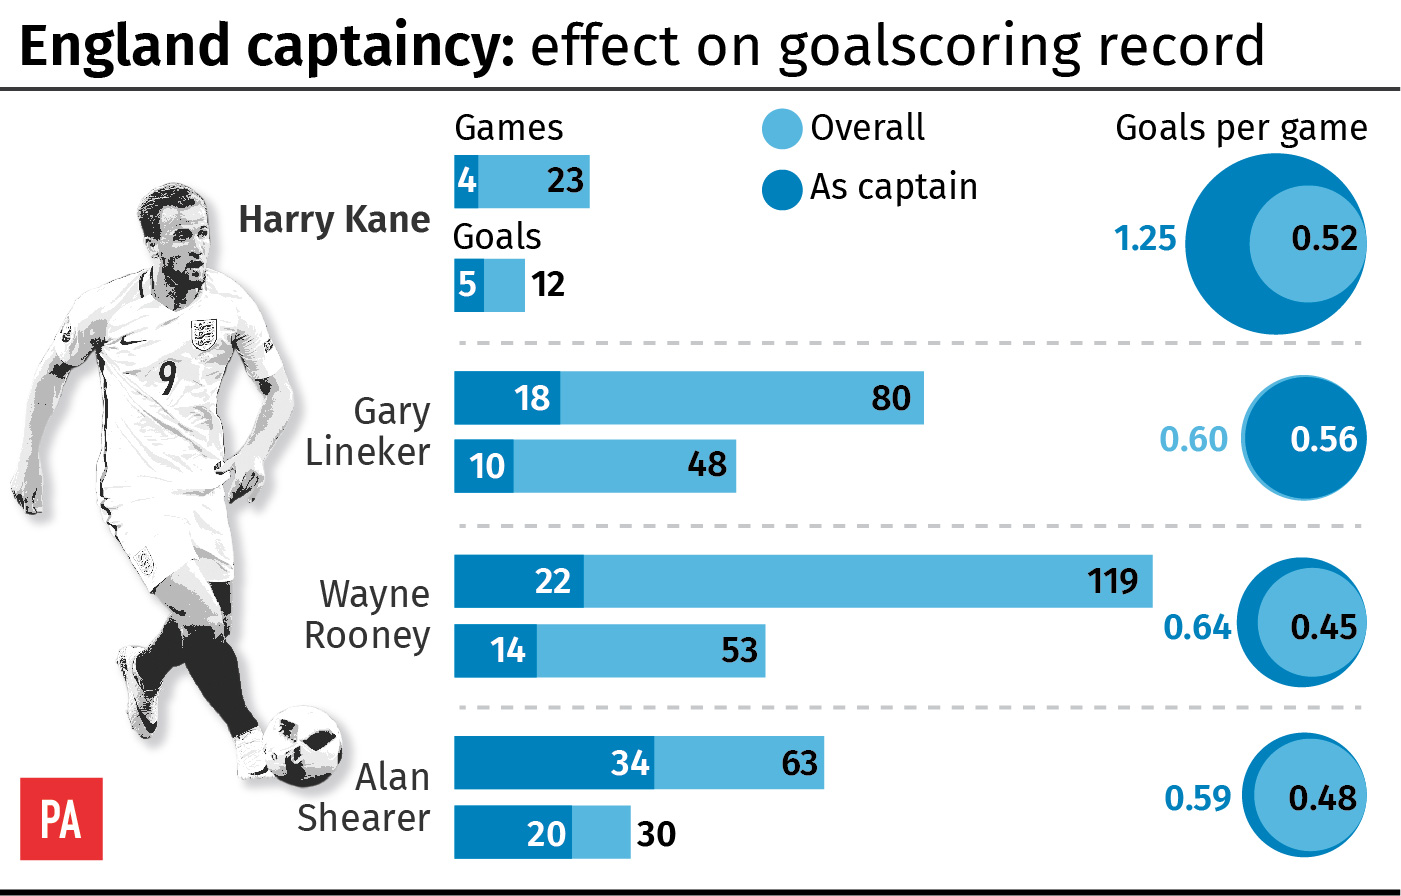 Effect of England captaincy on a player's goalscoring record